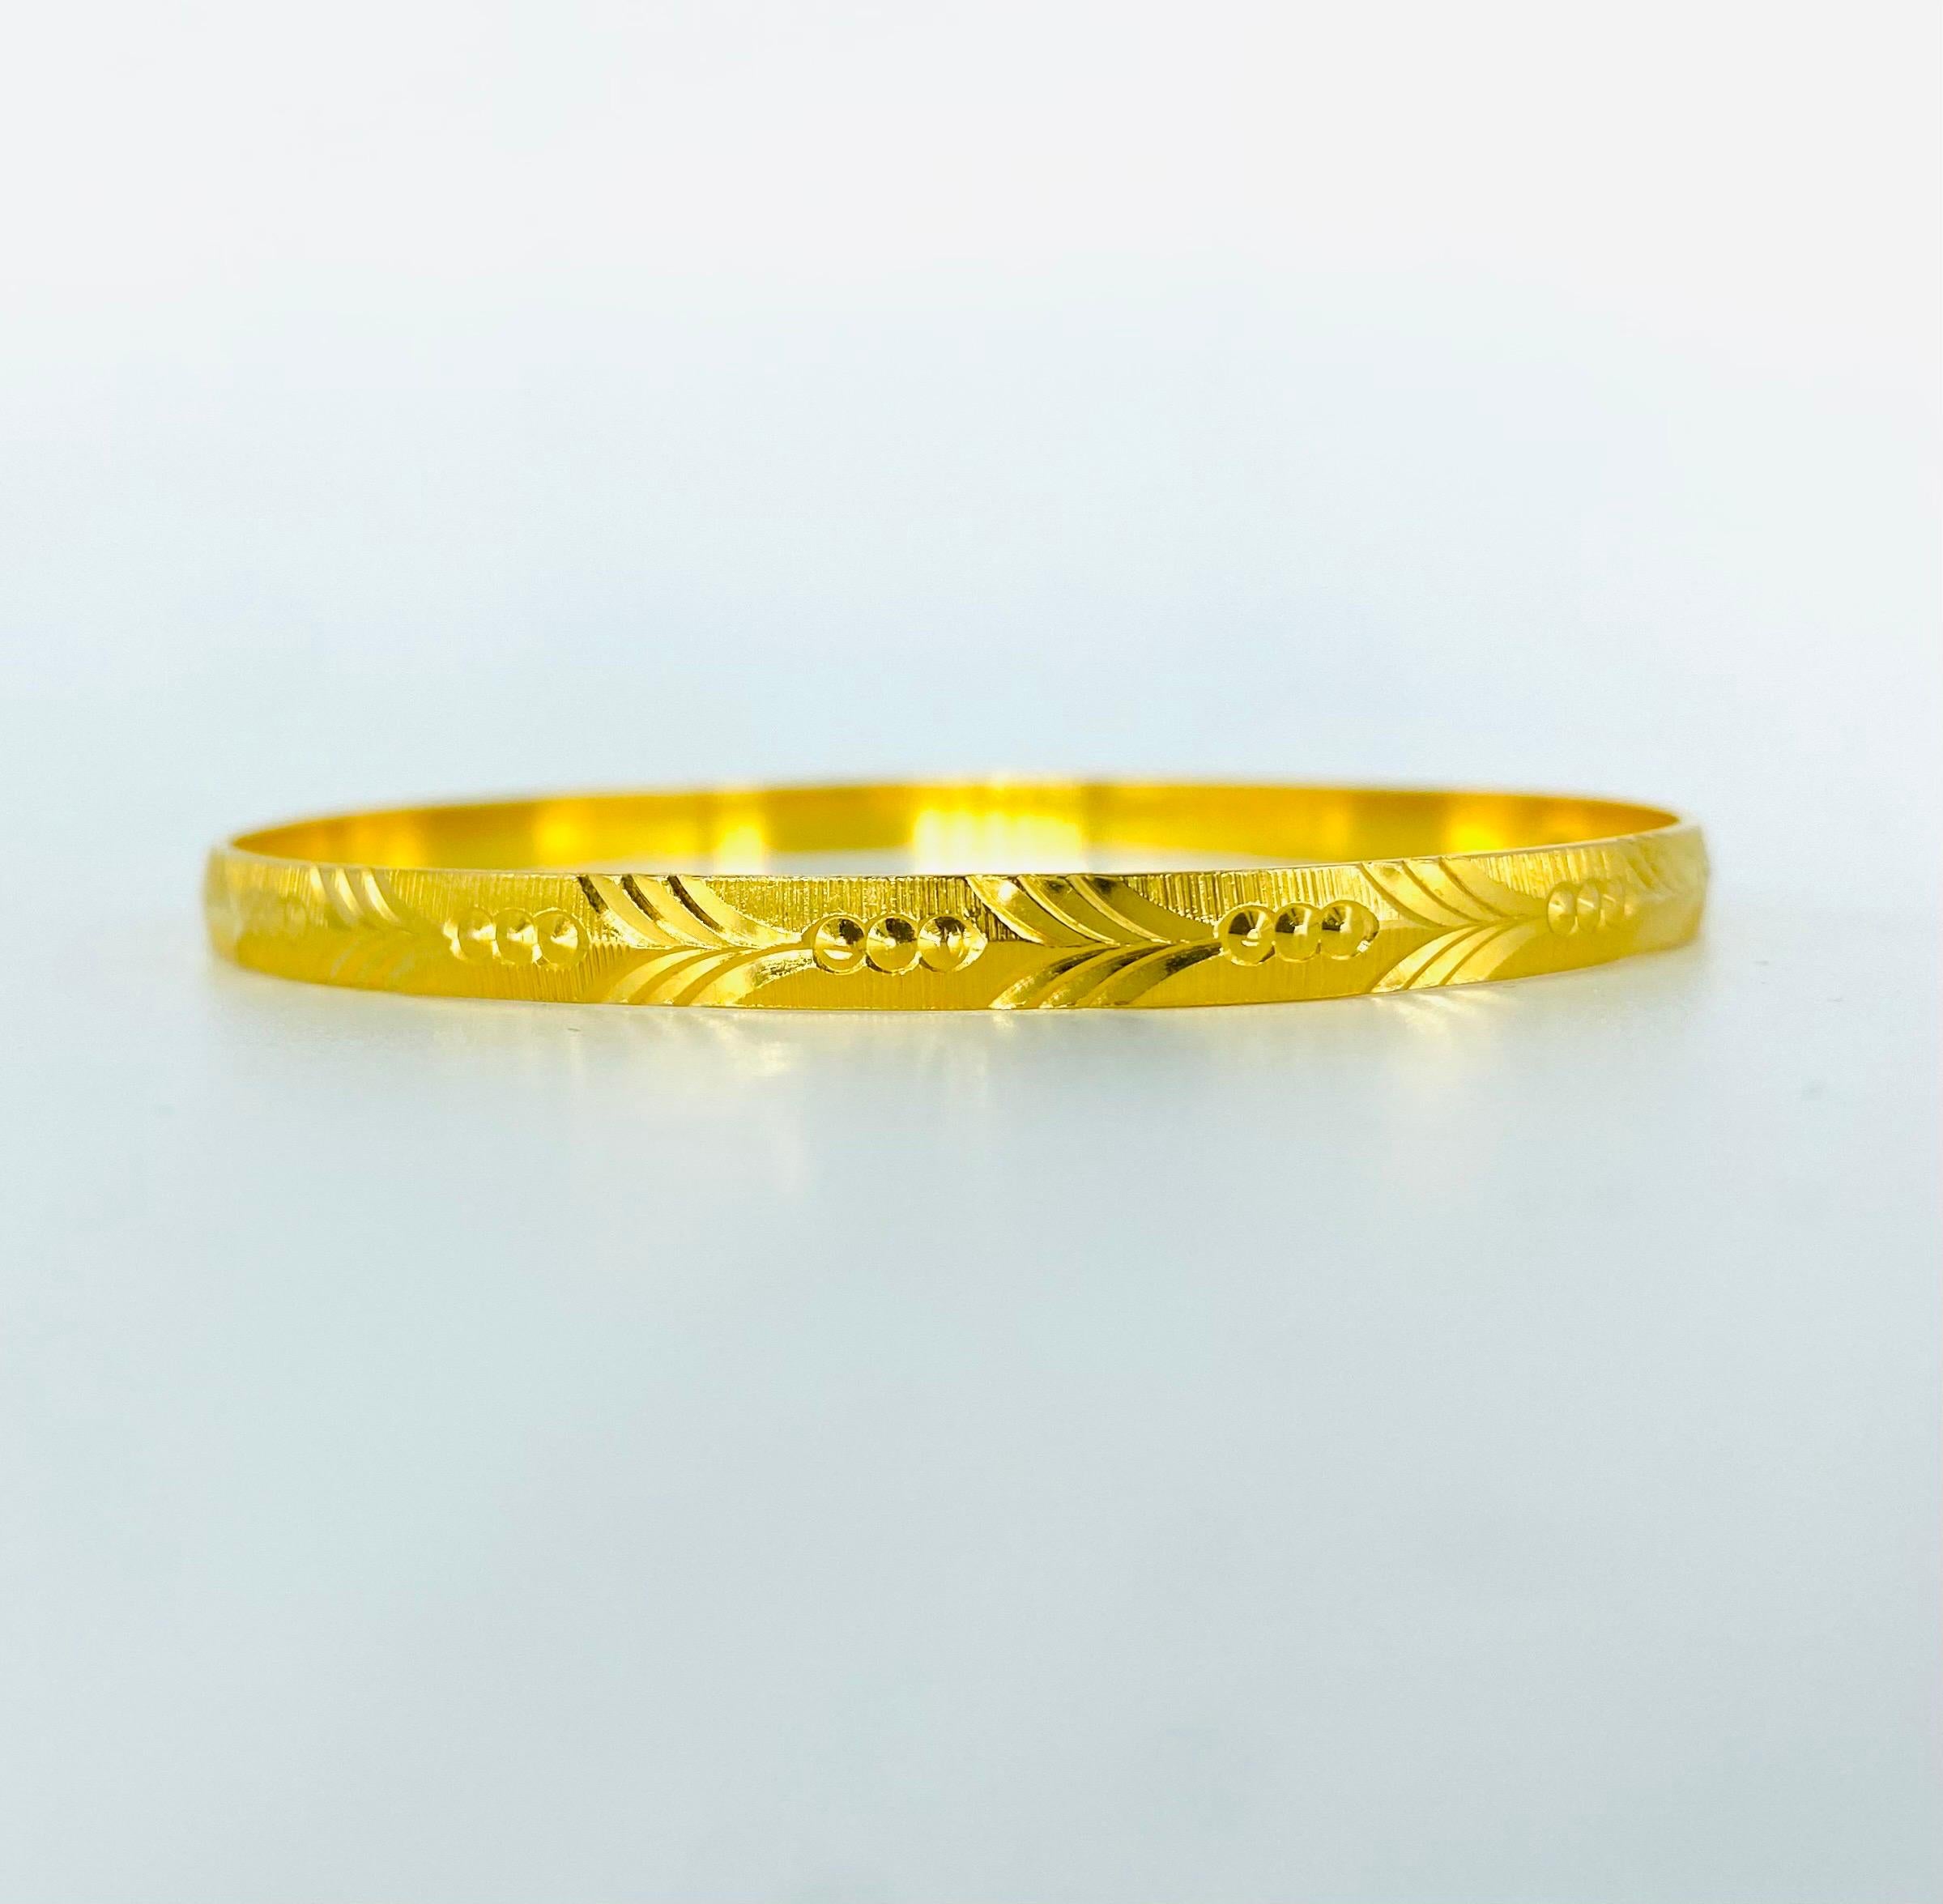 Vintage 22k Gold 4.5mm Diamond Cut Leaf Design Bangle. The bangle fits a wrist up to 6 inches. These are very rare and unique 22k solid gold bangles. The bangle weights 12.9 grams.